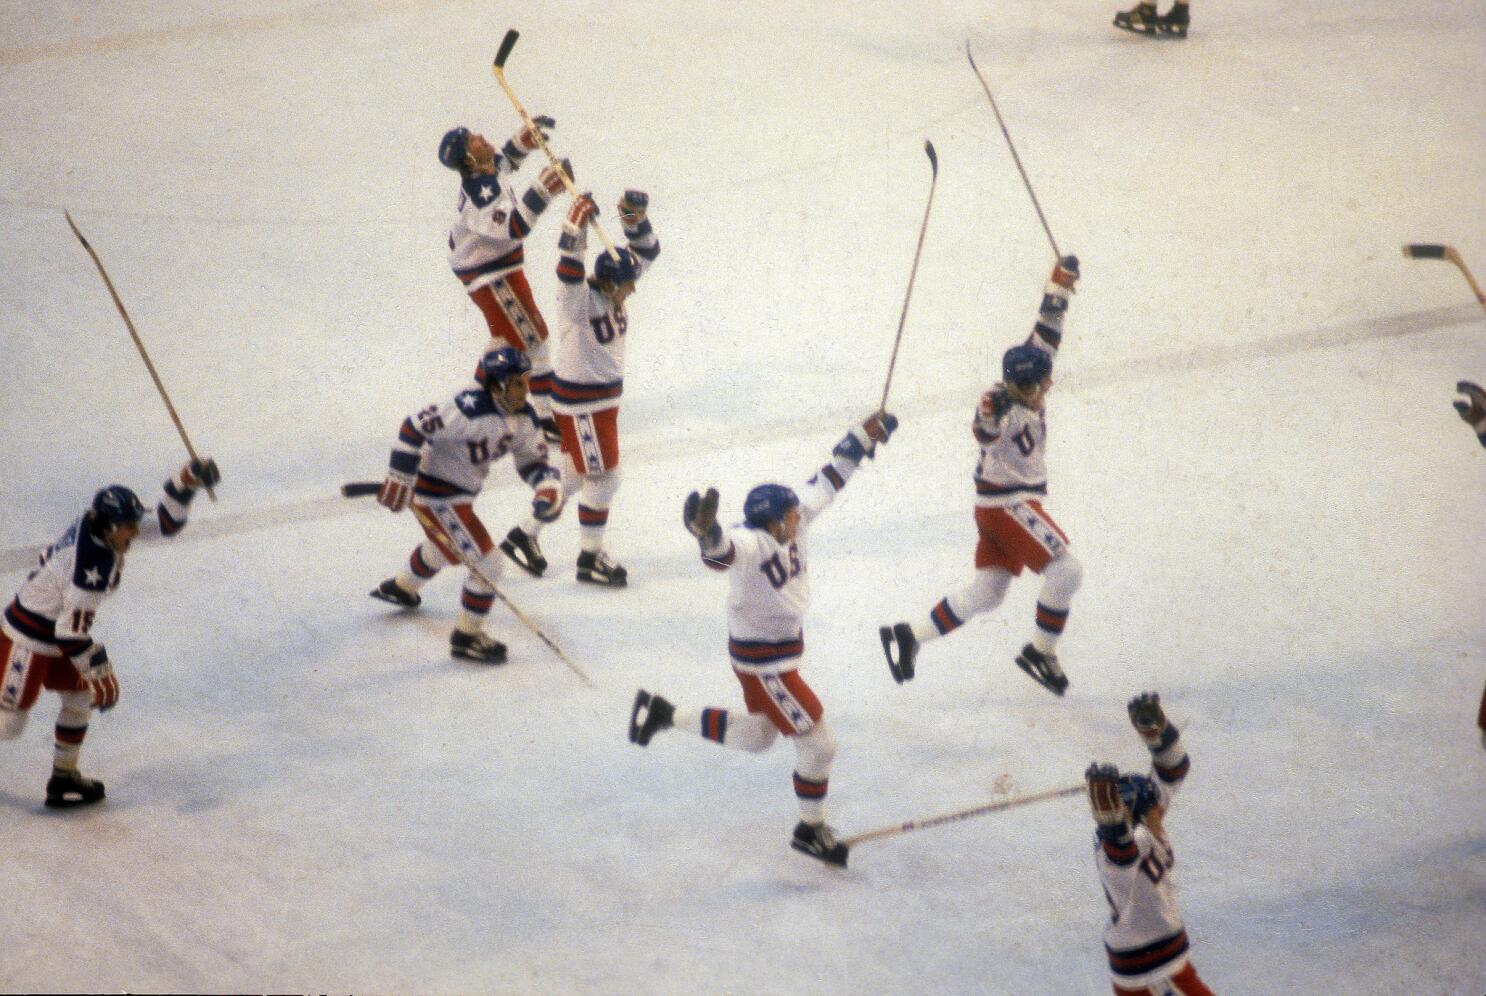 1980 US Olympic hockey players remember 'Miracle on Ice' 35 years later